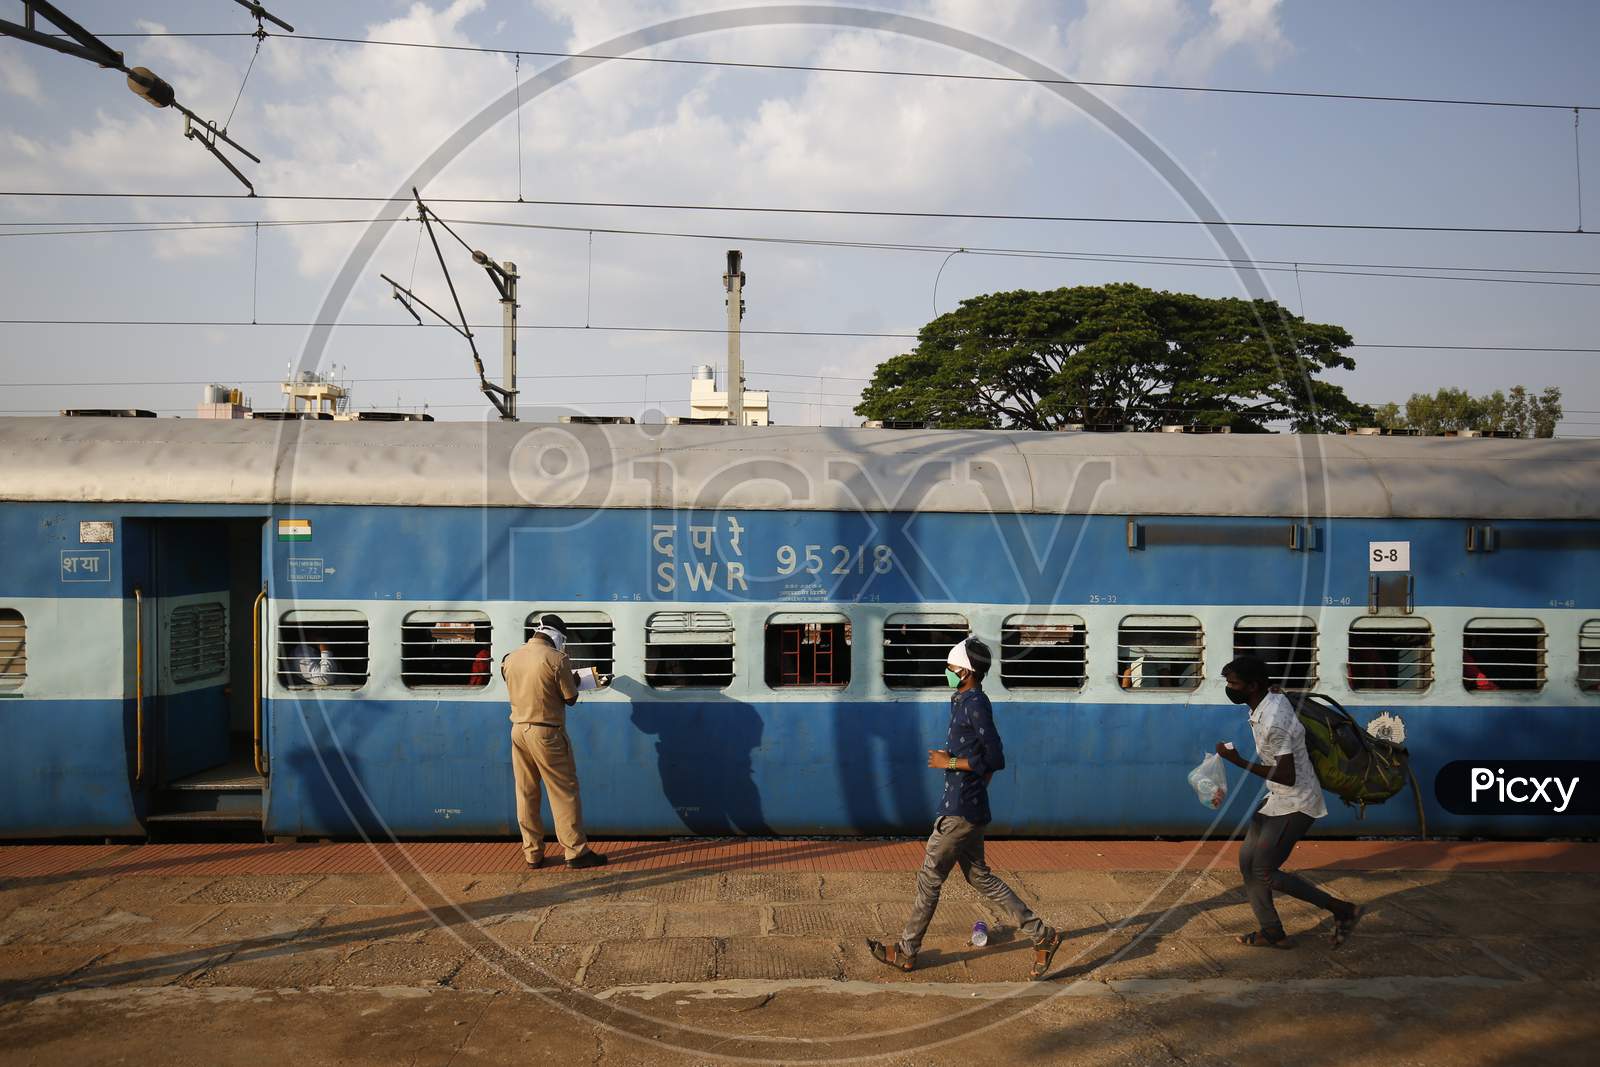 Men run past a Railway Protection Force (RPF) personnel as he checks travel documents of people travelling to Danapur, Bihar in a special train arranged by the government to repatriate migrant workers at the Chikkabanavara Junction Railway Station on the outskirts of Bangalore, India.